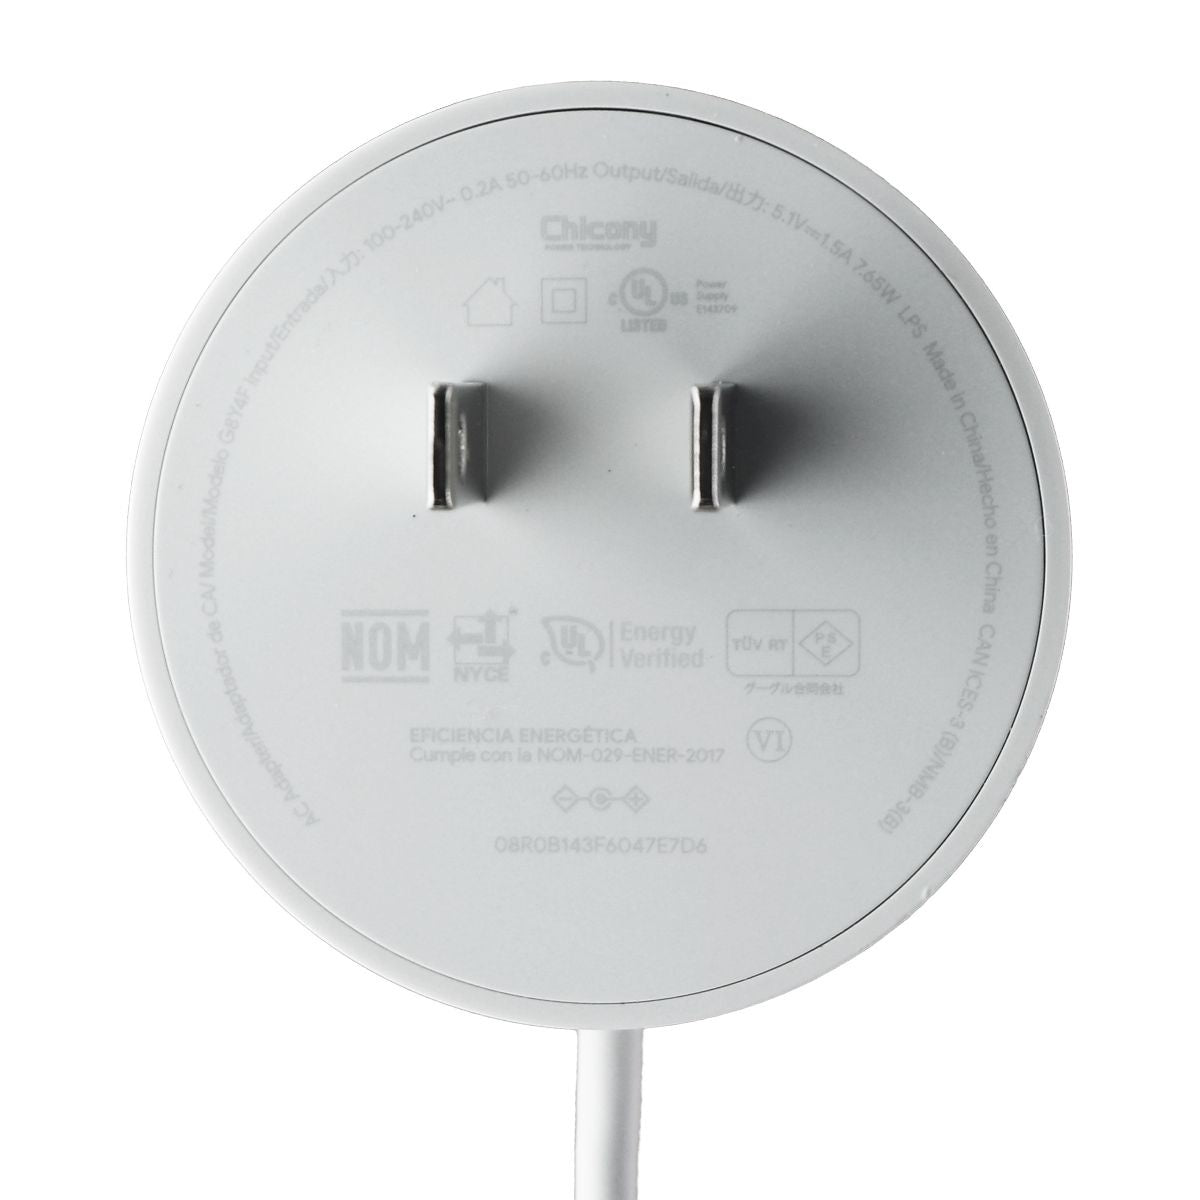 Google (7.65A) 5.1V/1.5A AC Power Adapter - White (G8Y4F)